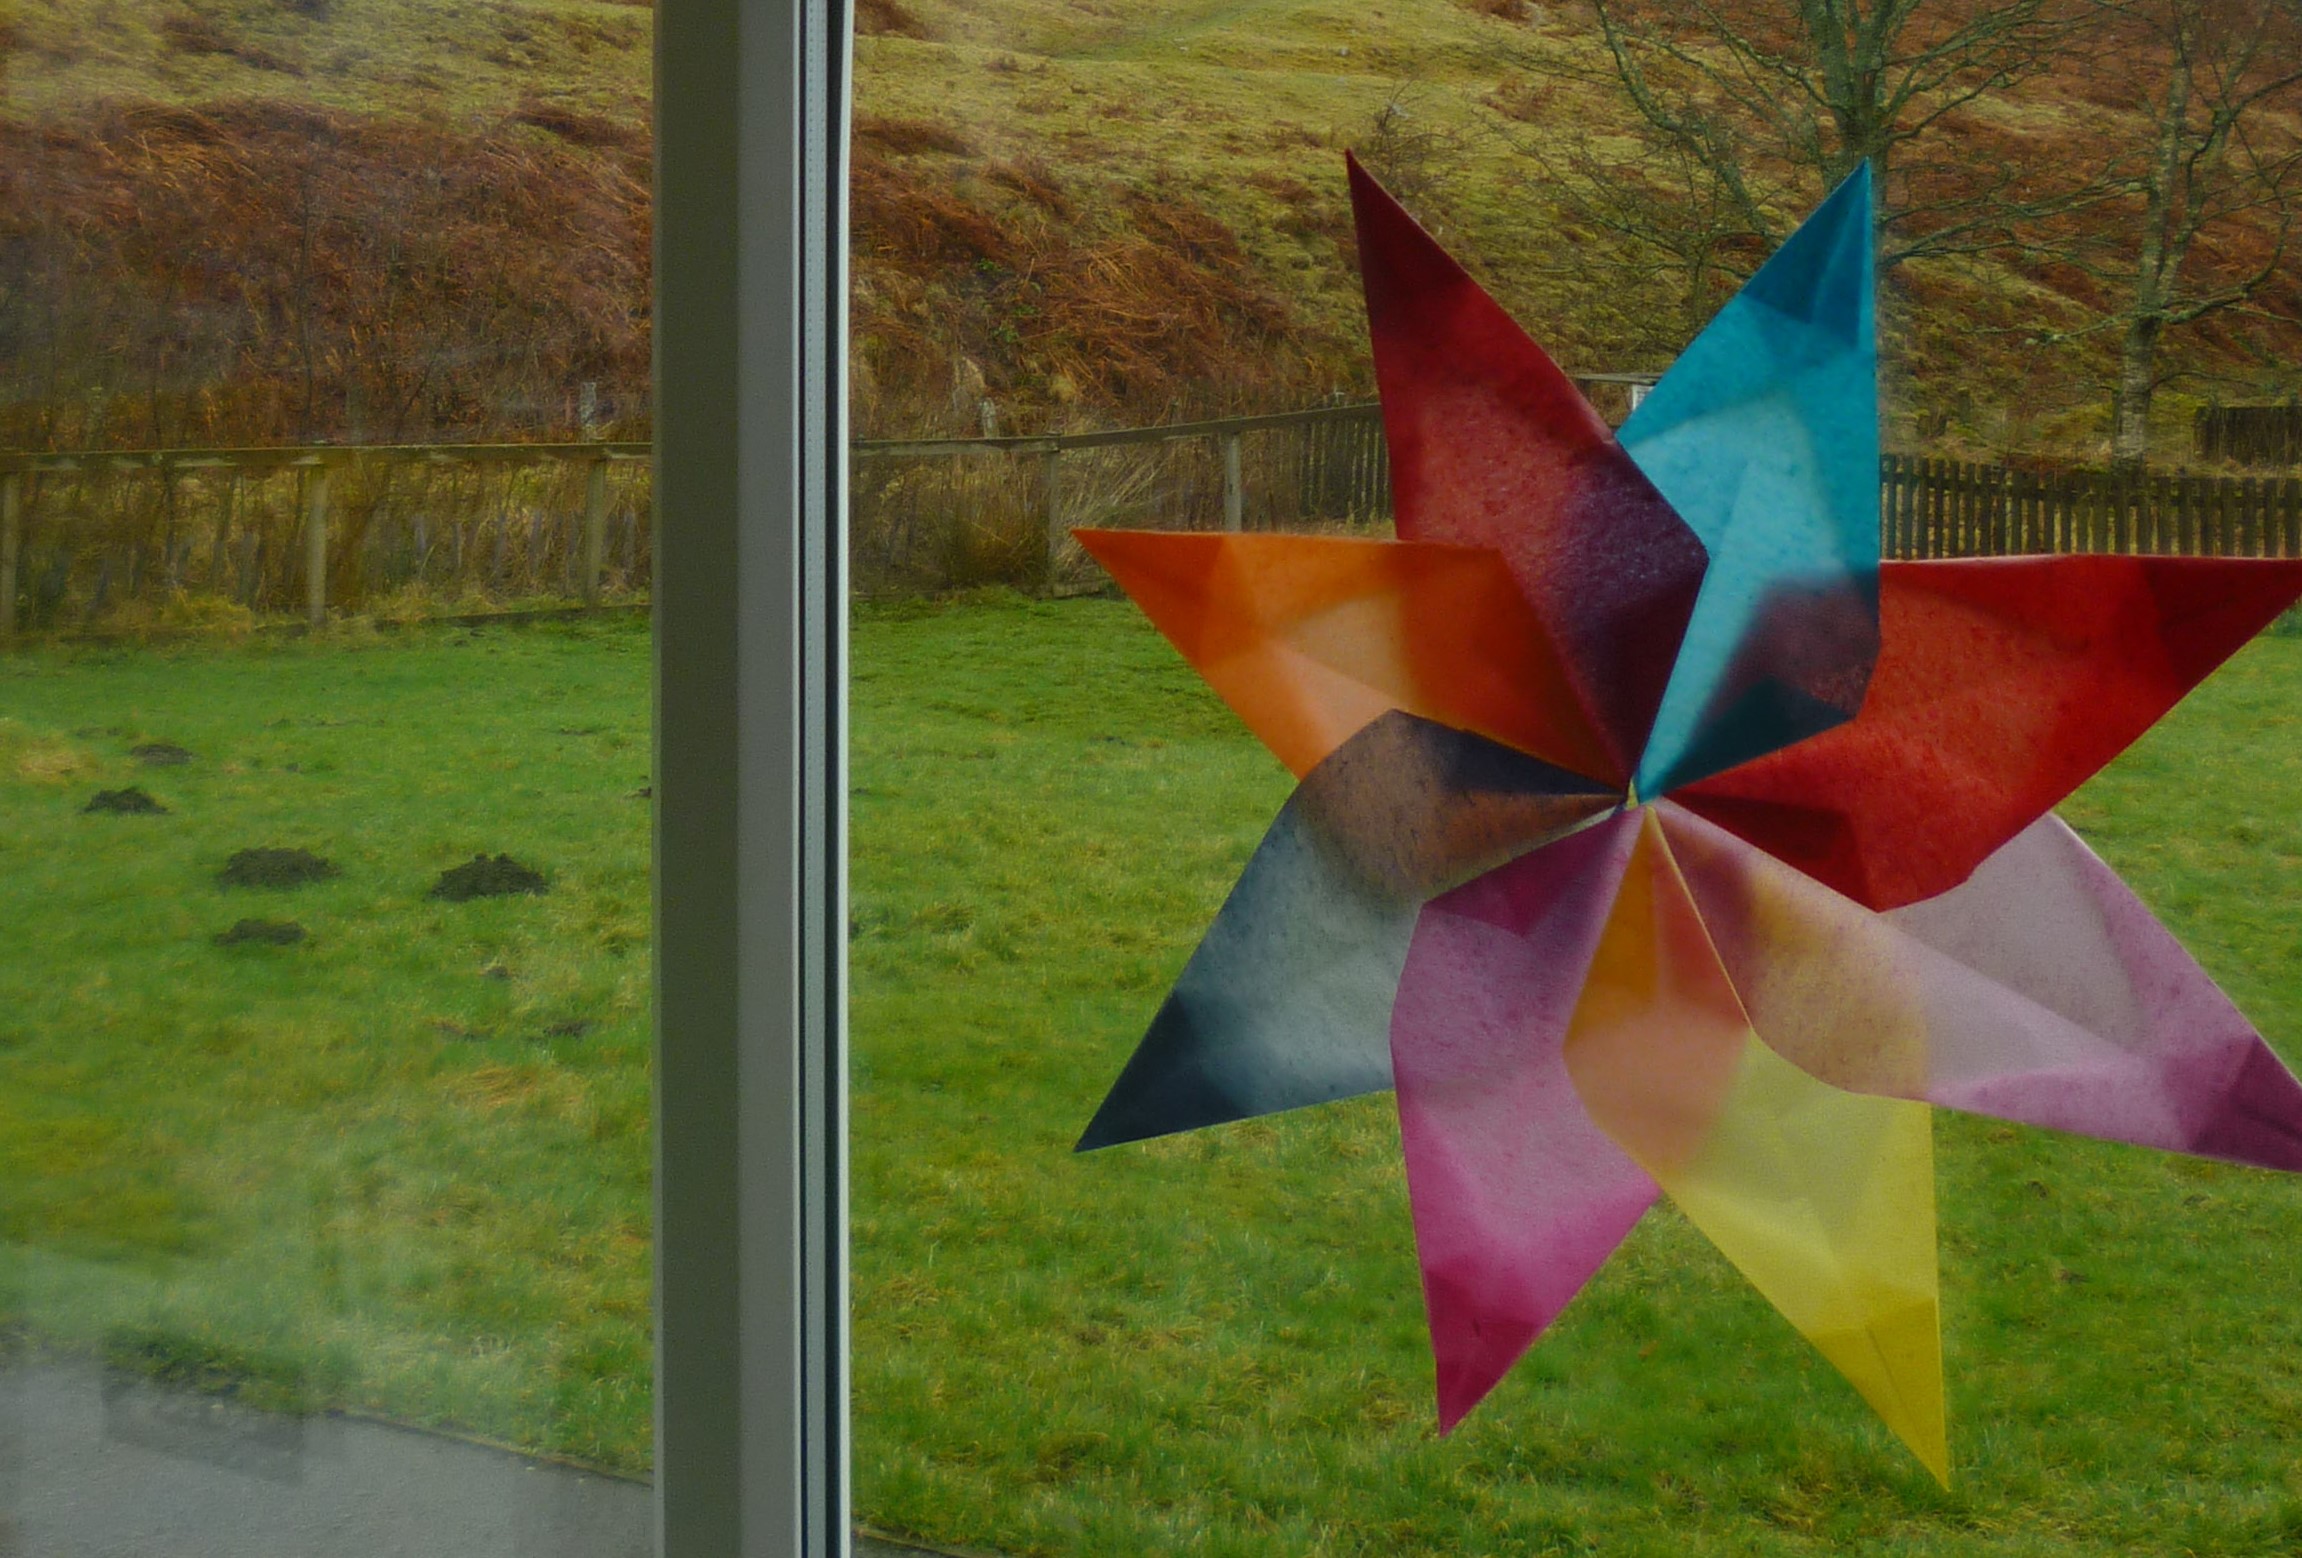 An origami of an eight point flower made out of coloured paper stuck to a window overlooking a rural landscape. 